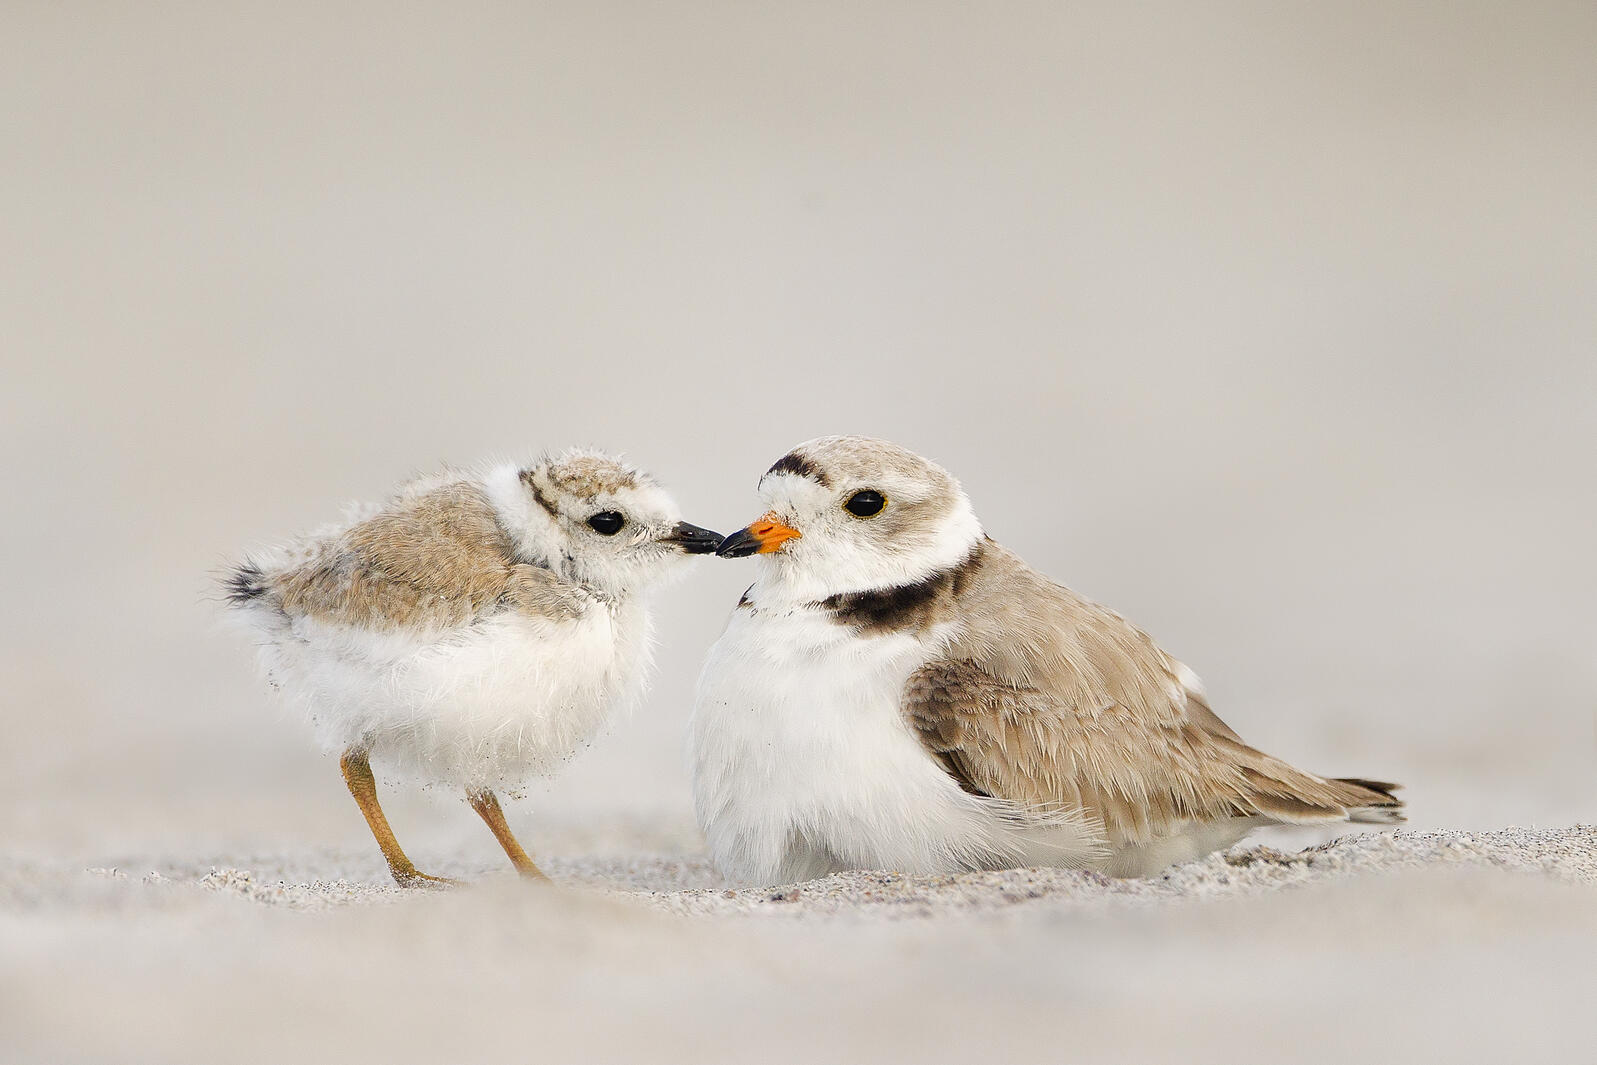 A Piping Plover adult sits on the sand with a standing plover chick, beak to beak. 